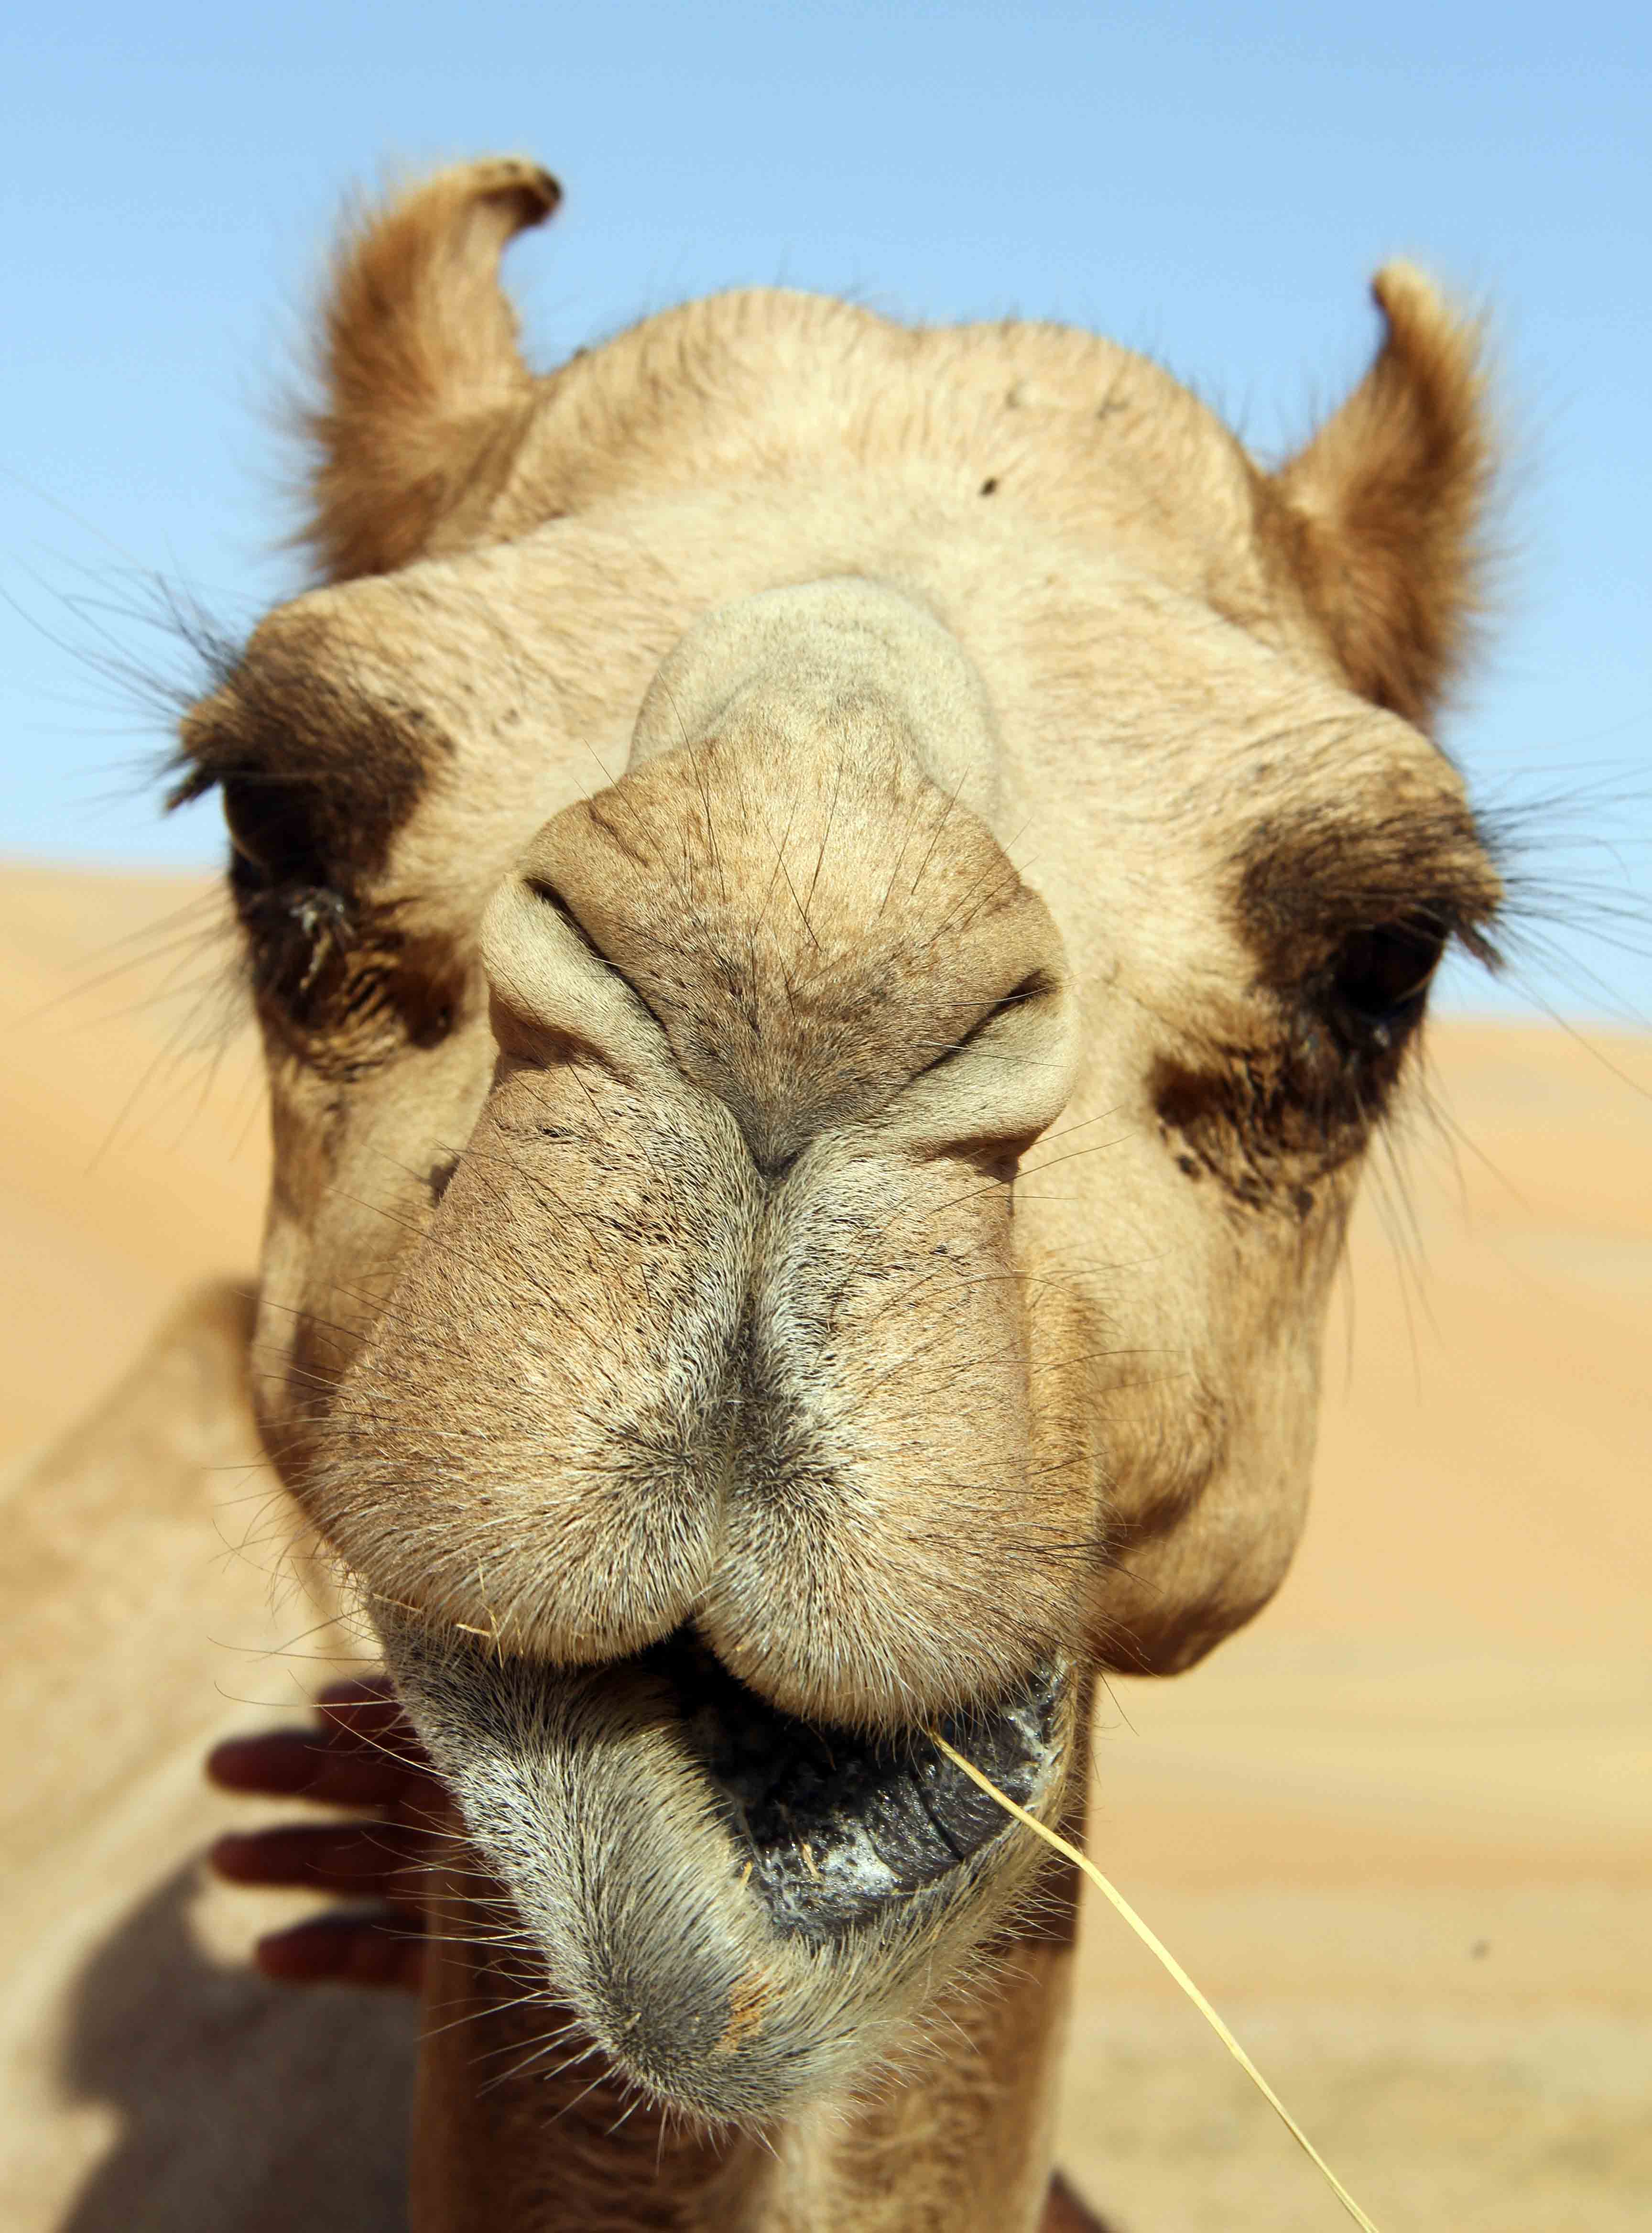 This camel was definitely ready for his close-up